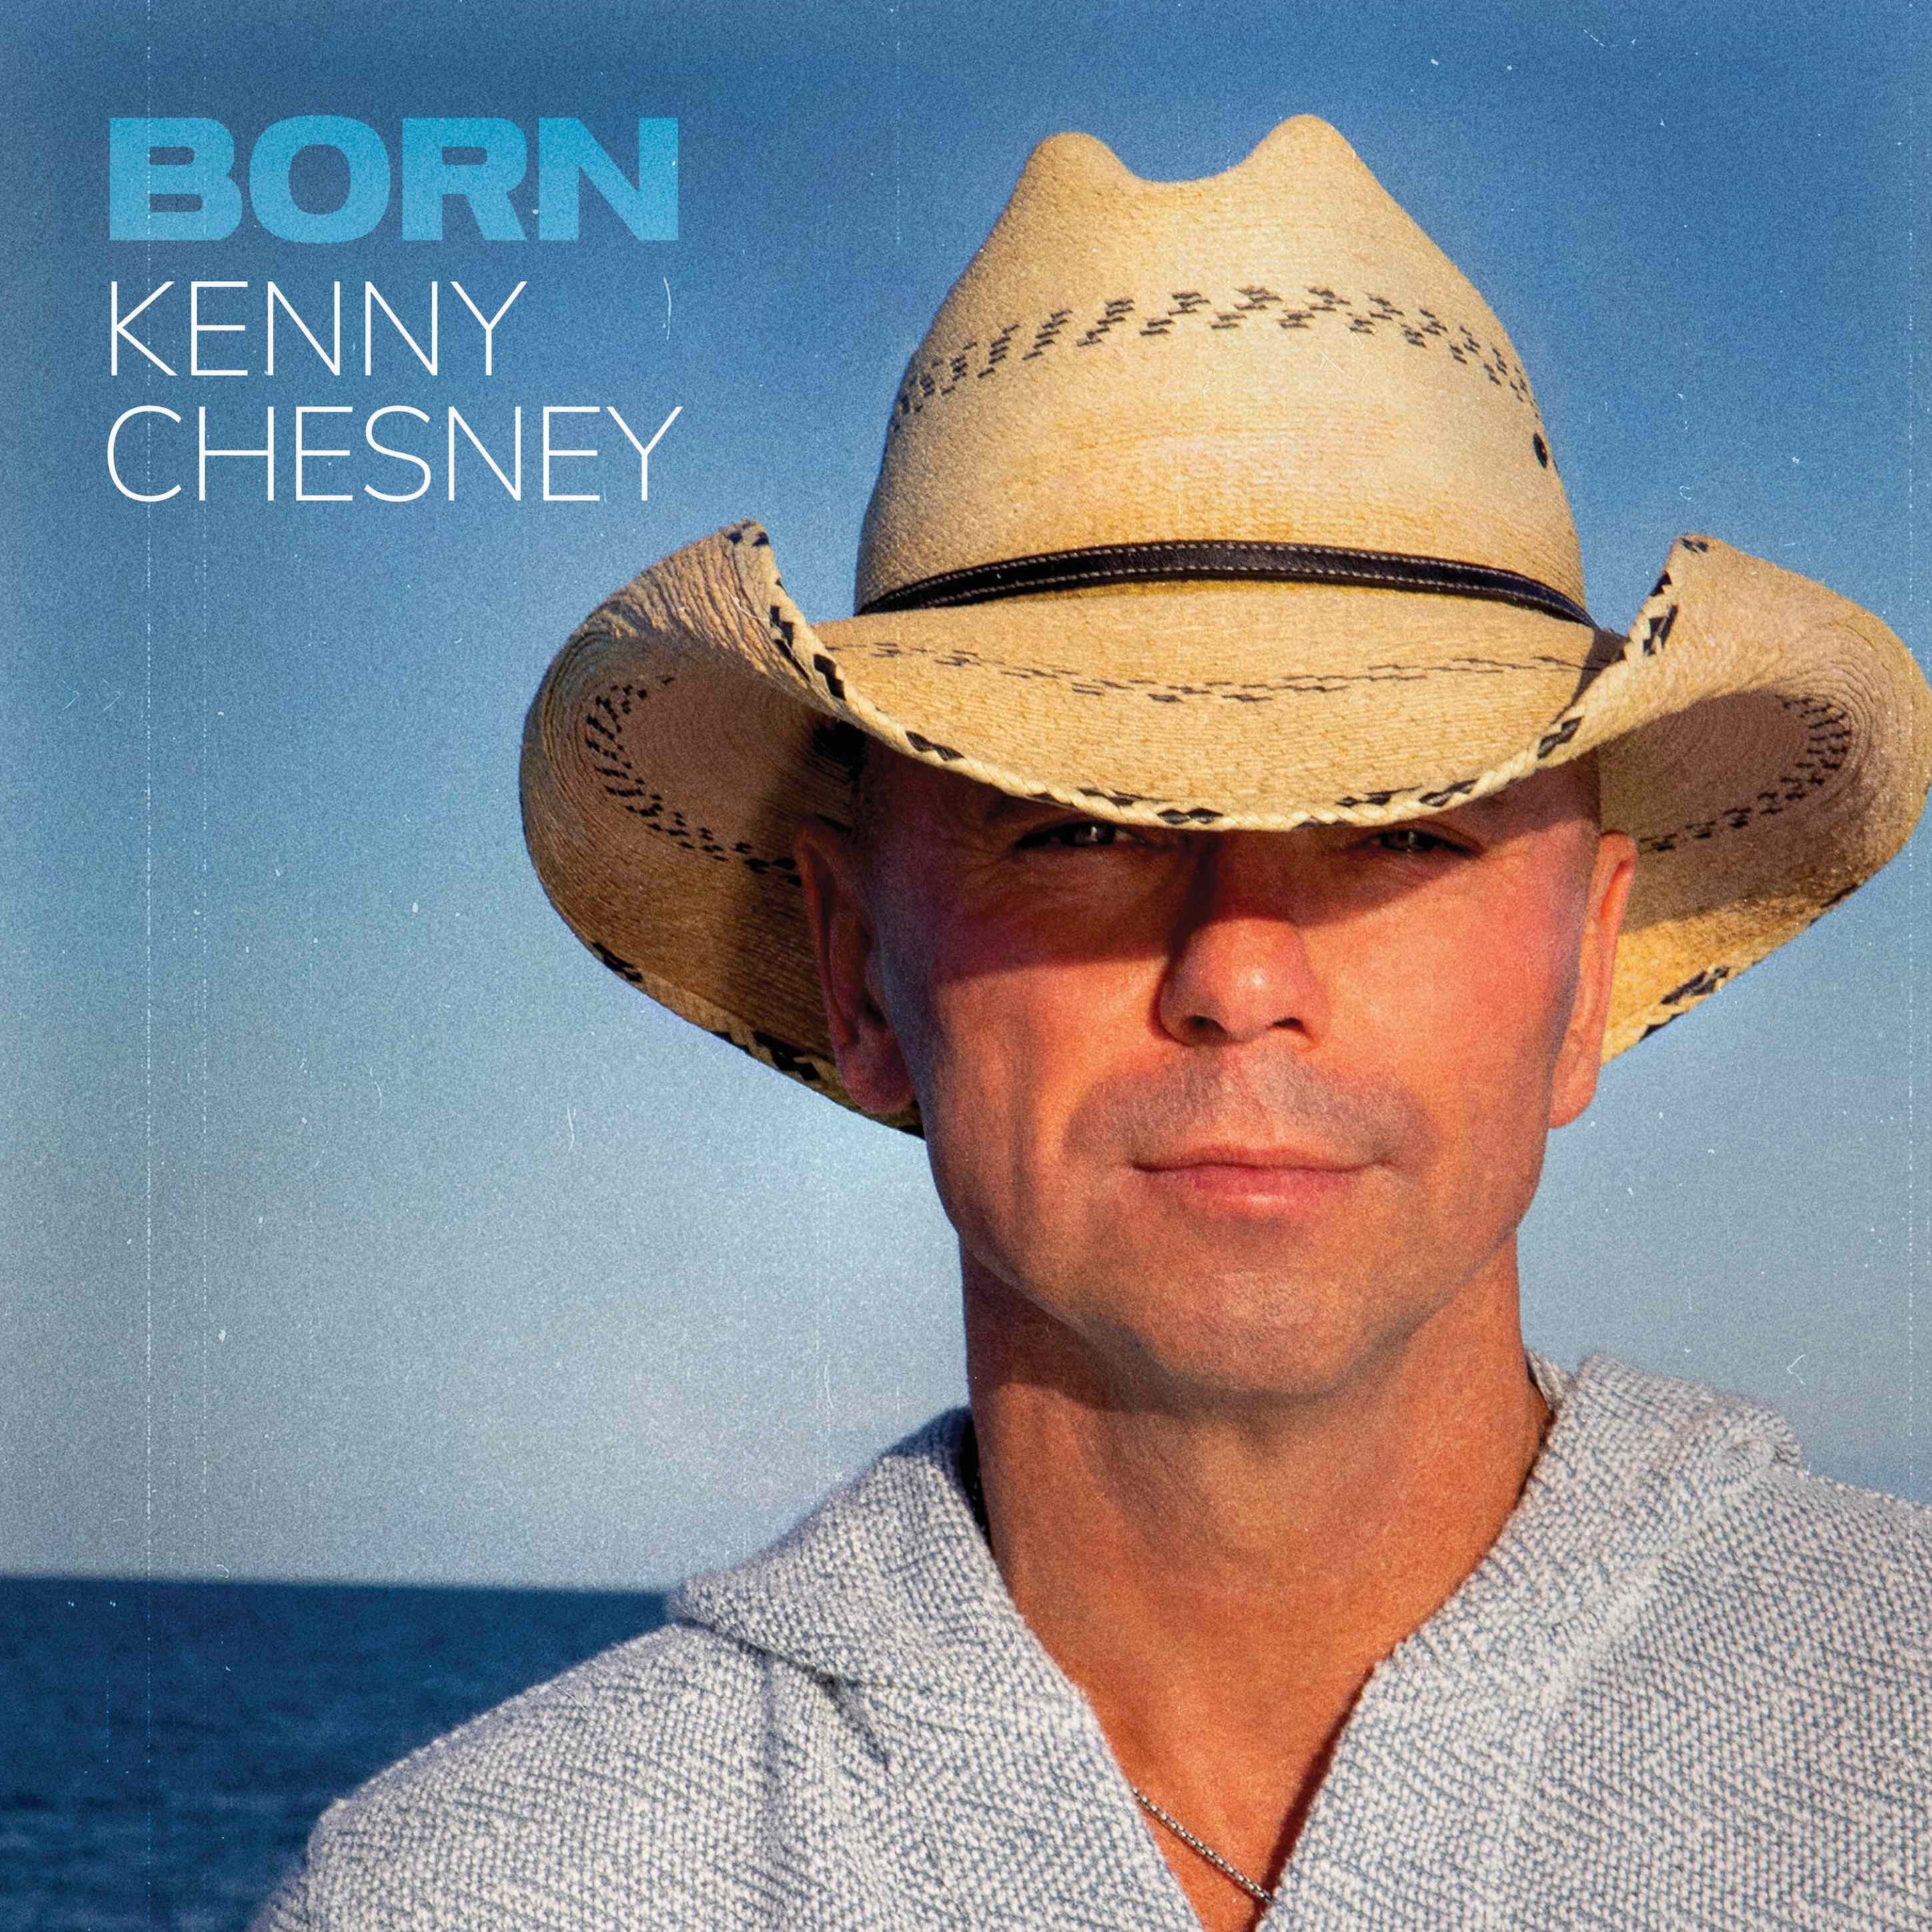 Kenny Chesney - ‘BORN’: New Album Release Date and Tracklist | Holler